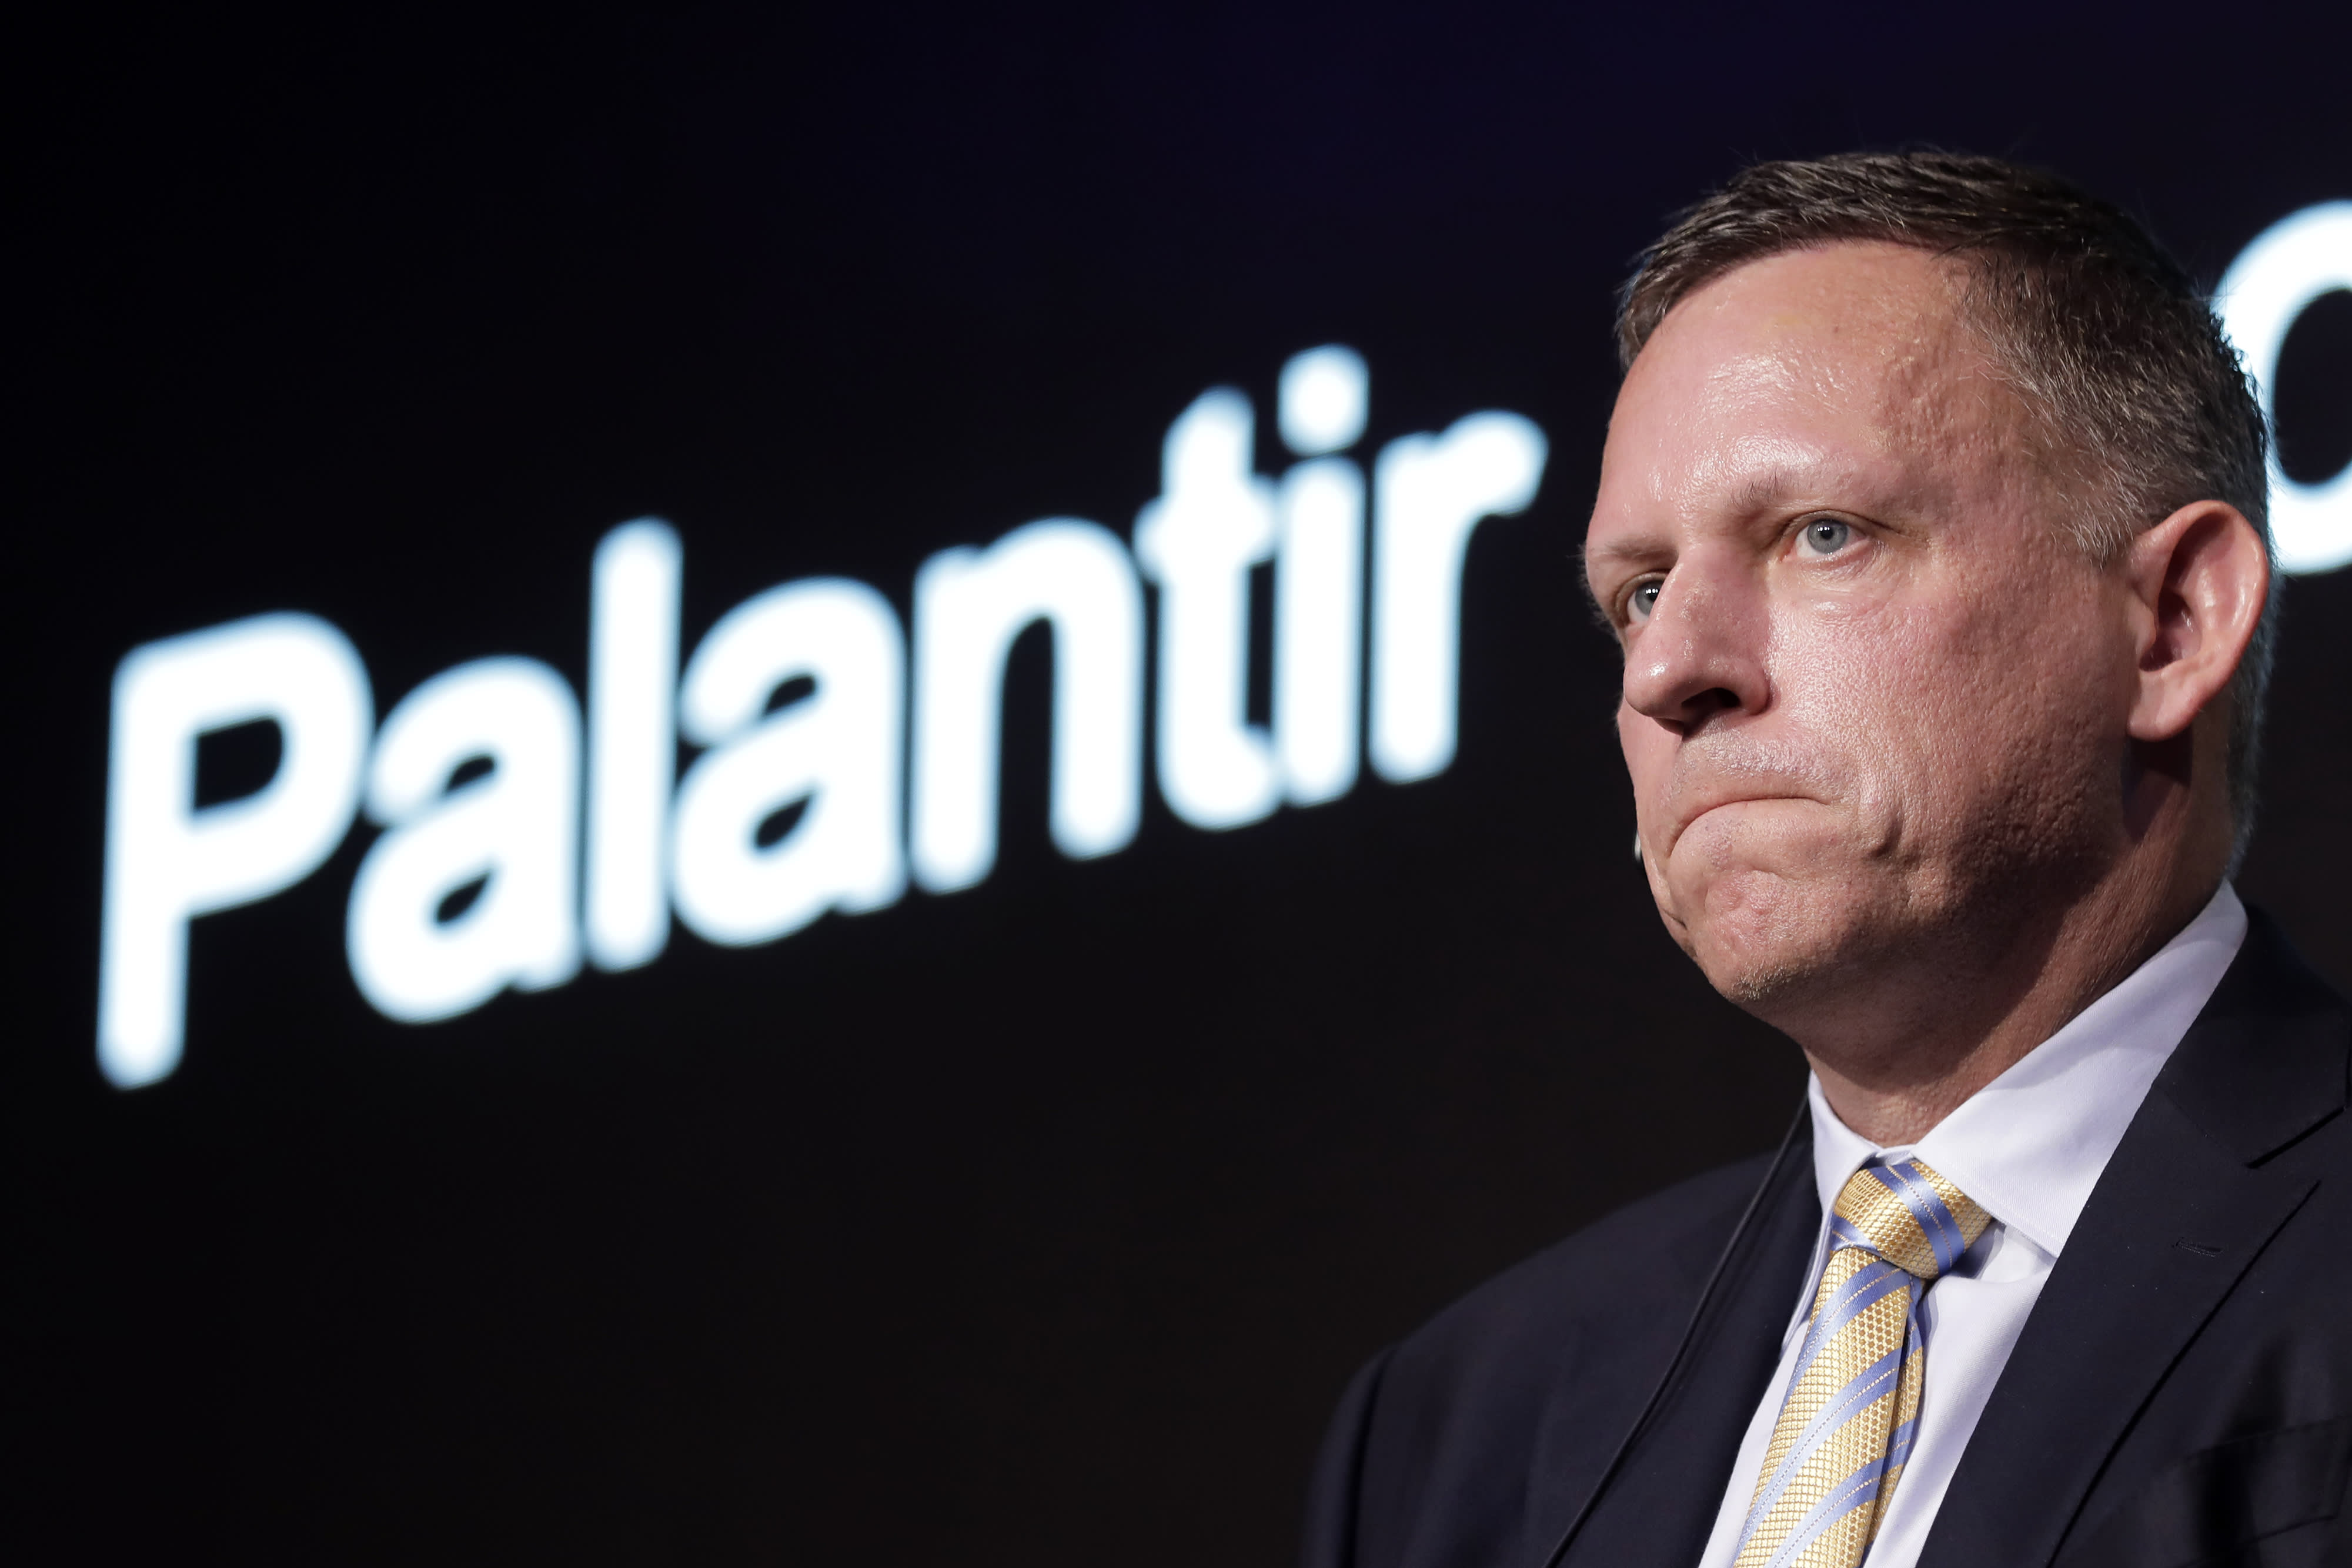 LONDON — A campaign is being launched to try to stop U.S. tech giant Palantir from working with the U.K.'s National Health Service. The "N